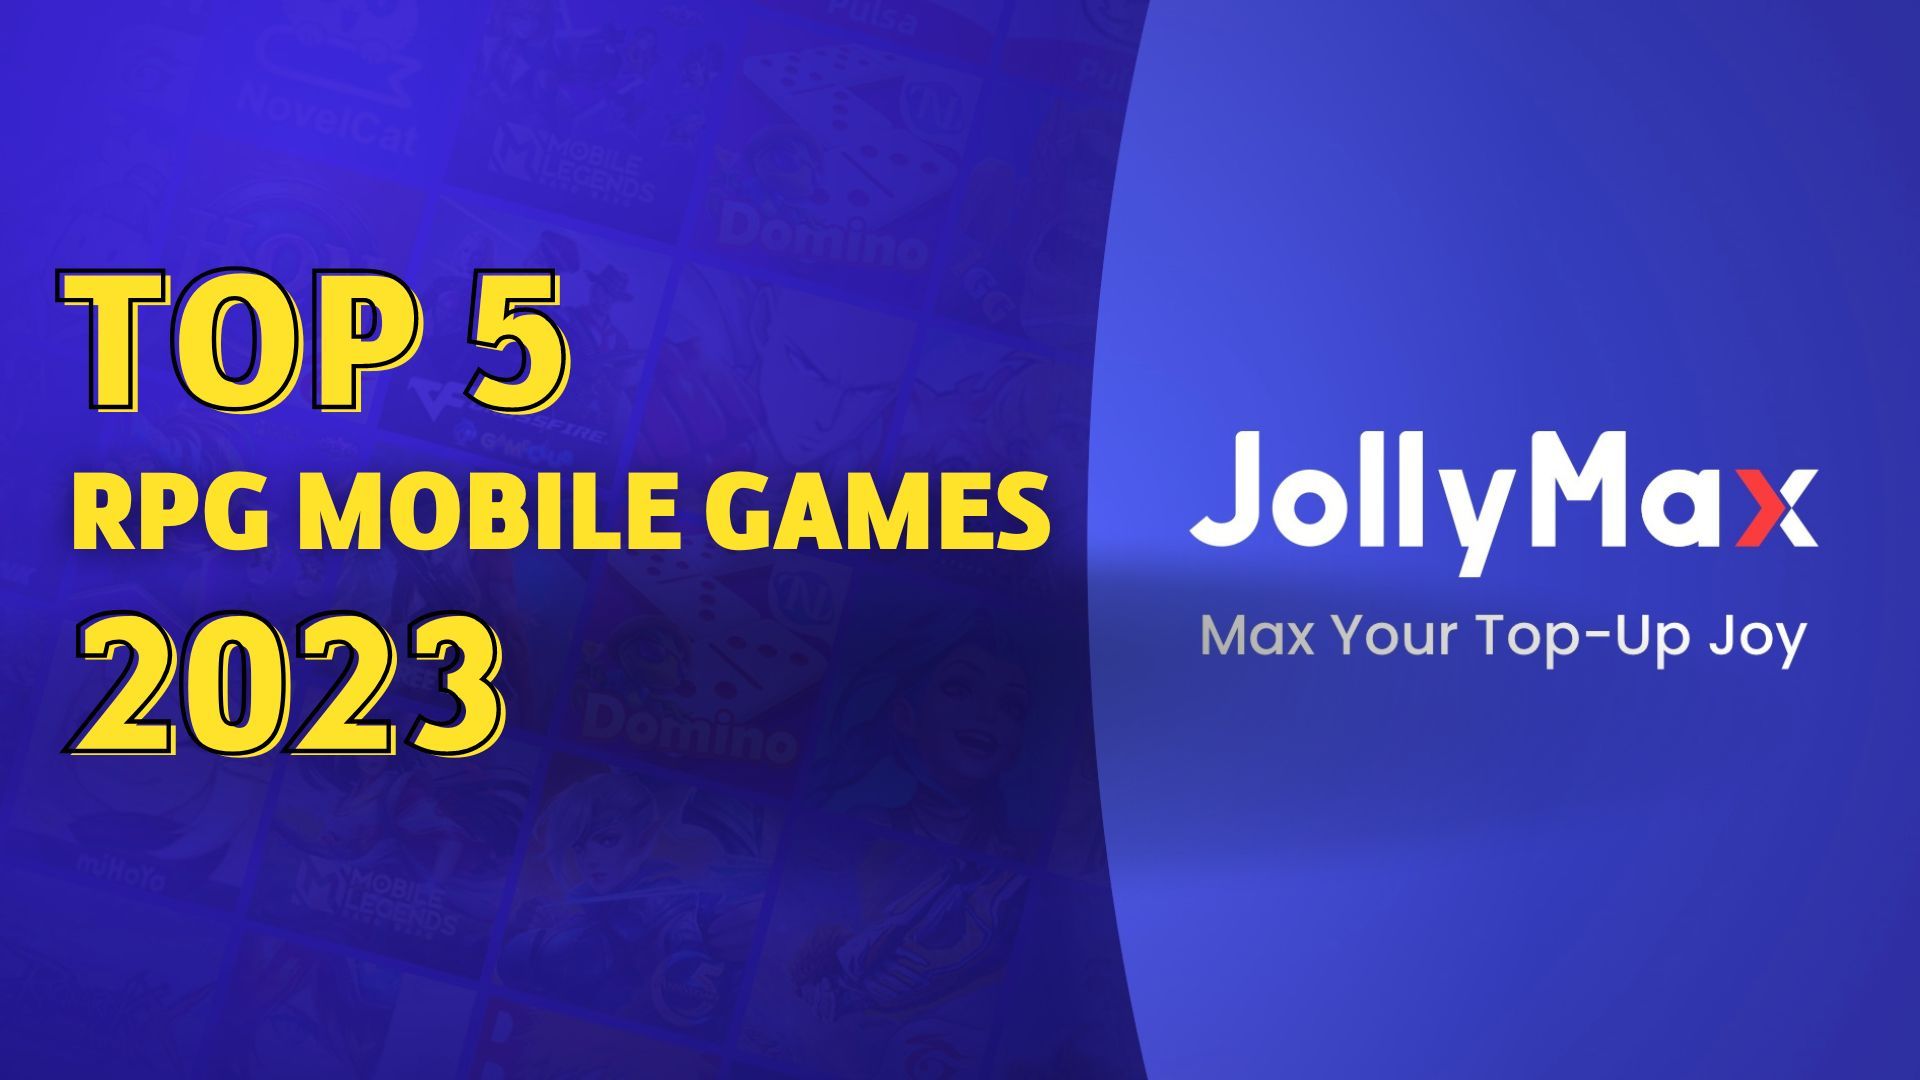 JollyMax: Max Your Top-Up Joy